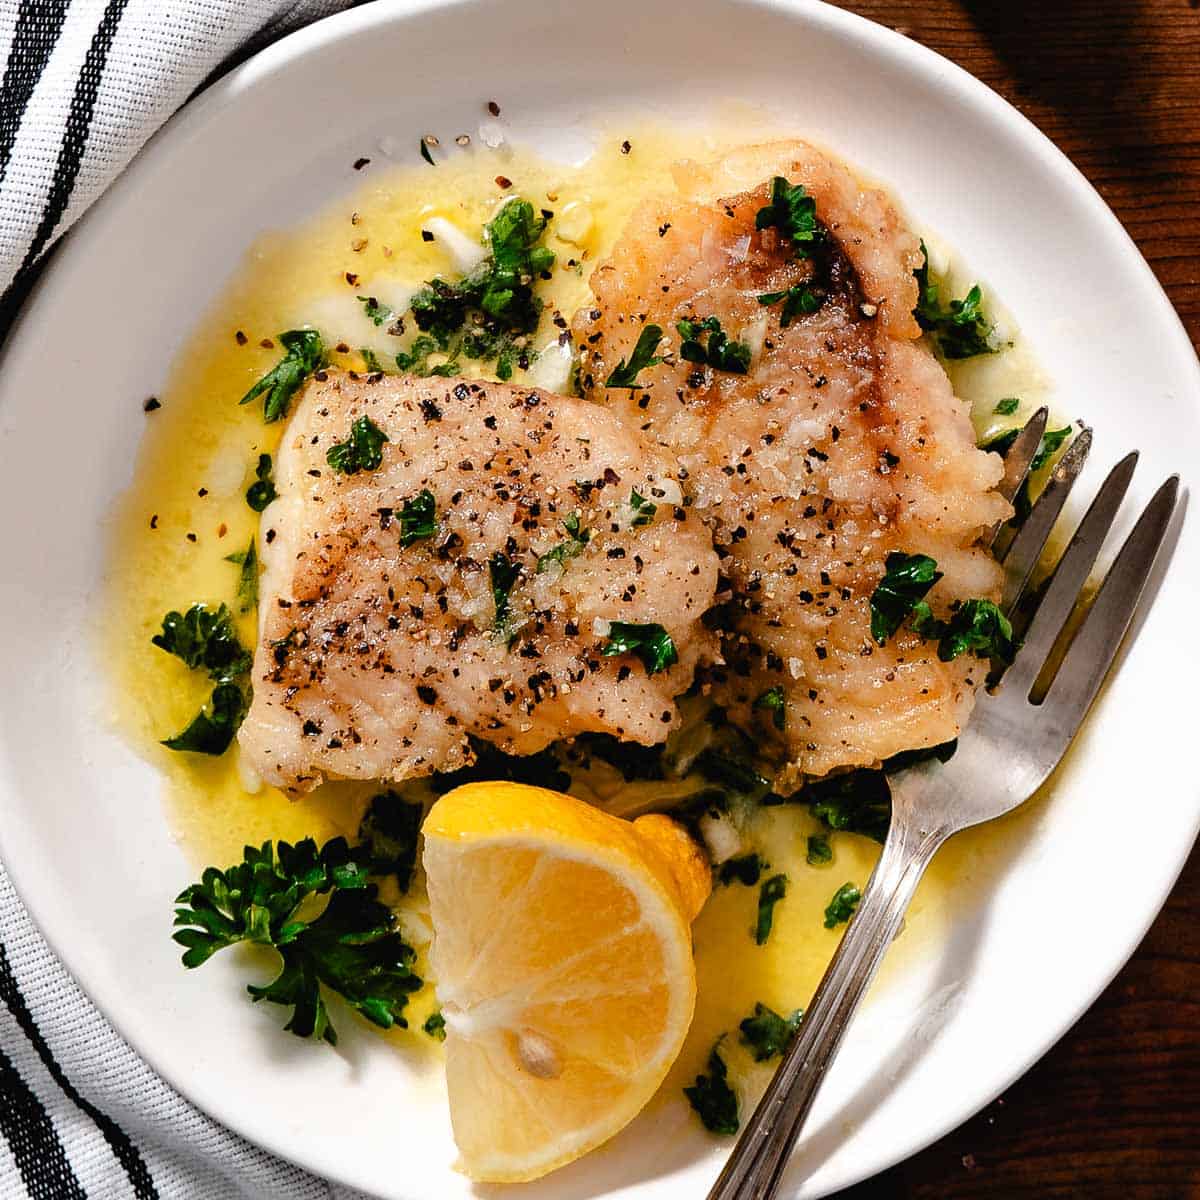 Tripletail with lemon butter sauce.